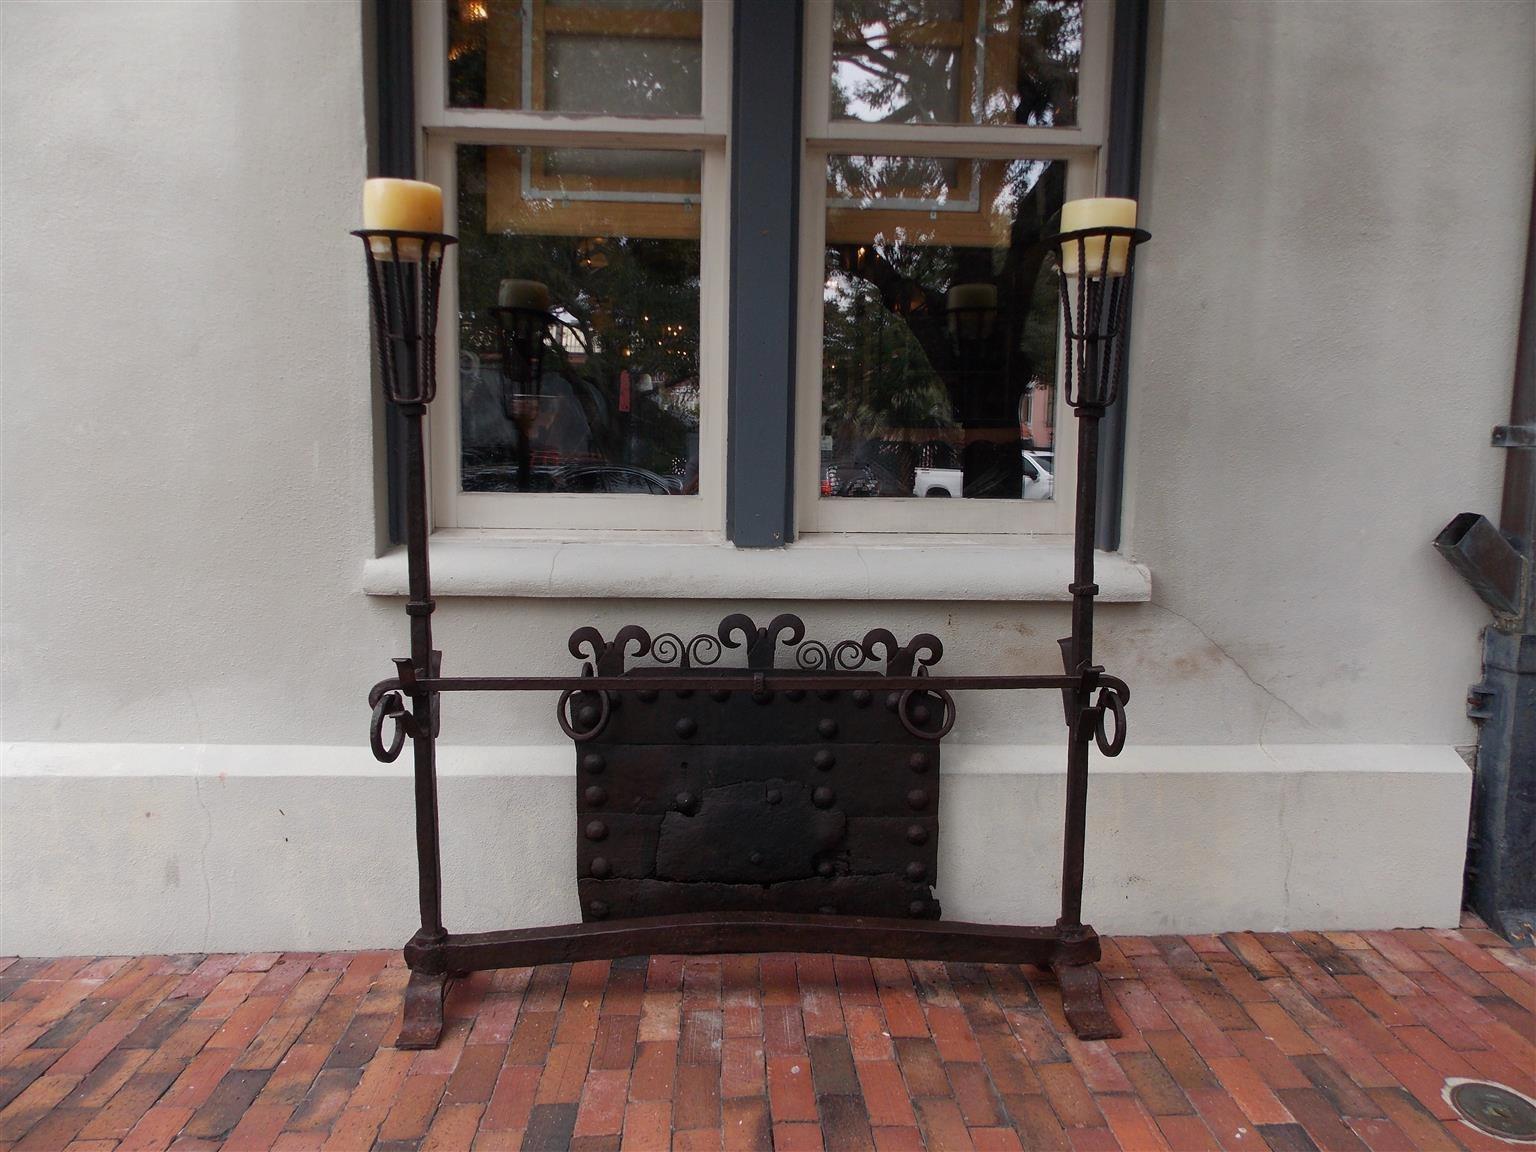 English monumental wrought iron fire guard with decorative scrolled medallion fire back and flanking wax candle holders, Mid-18th century.

Measurements
Andirons 66.75 tall, 65 wide, 13.5 deep
Fire back 33.25 tall, 38 wide.